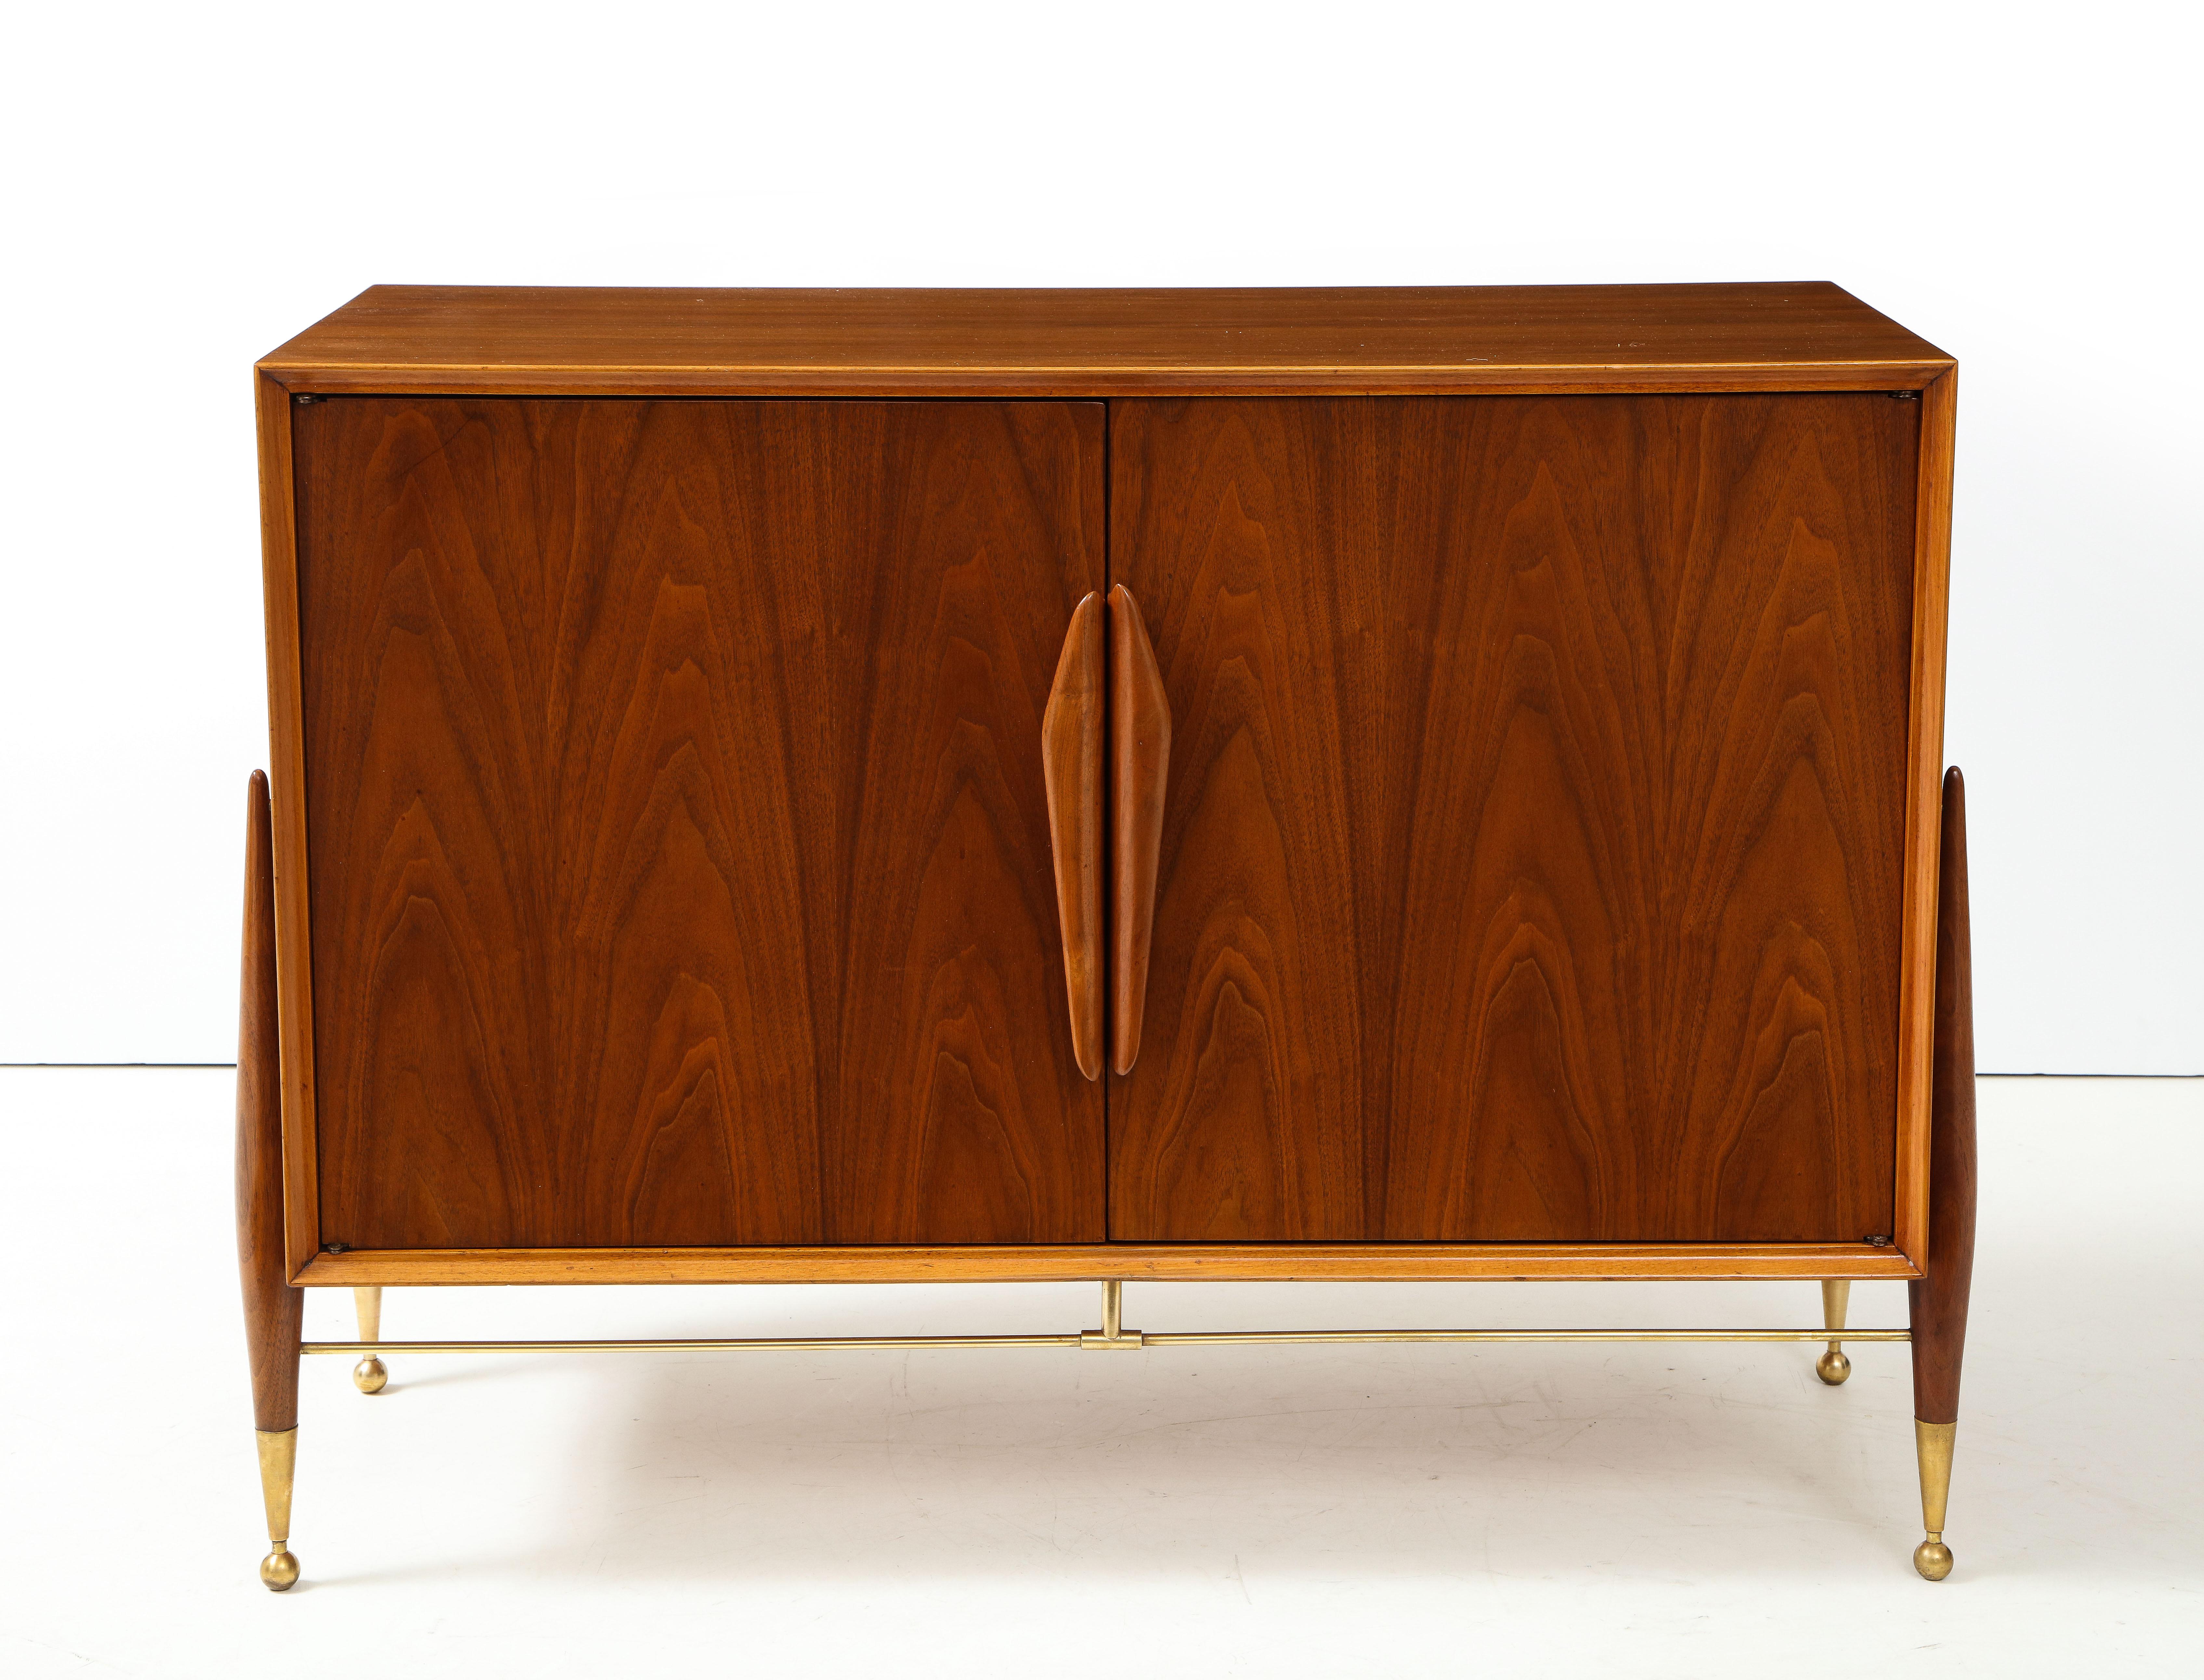 Stunning 1960's Mid-Century Modern walnut cabinet with solid brass legs and stretcher with two doors and adjustable shelf, fully restored with minor wear and patina due to age and use.